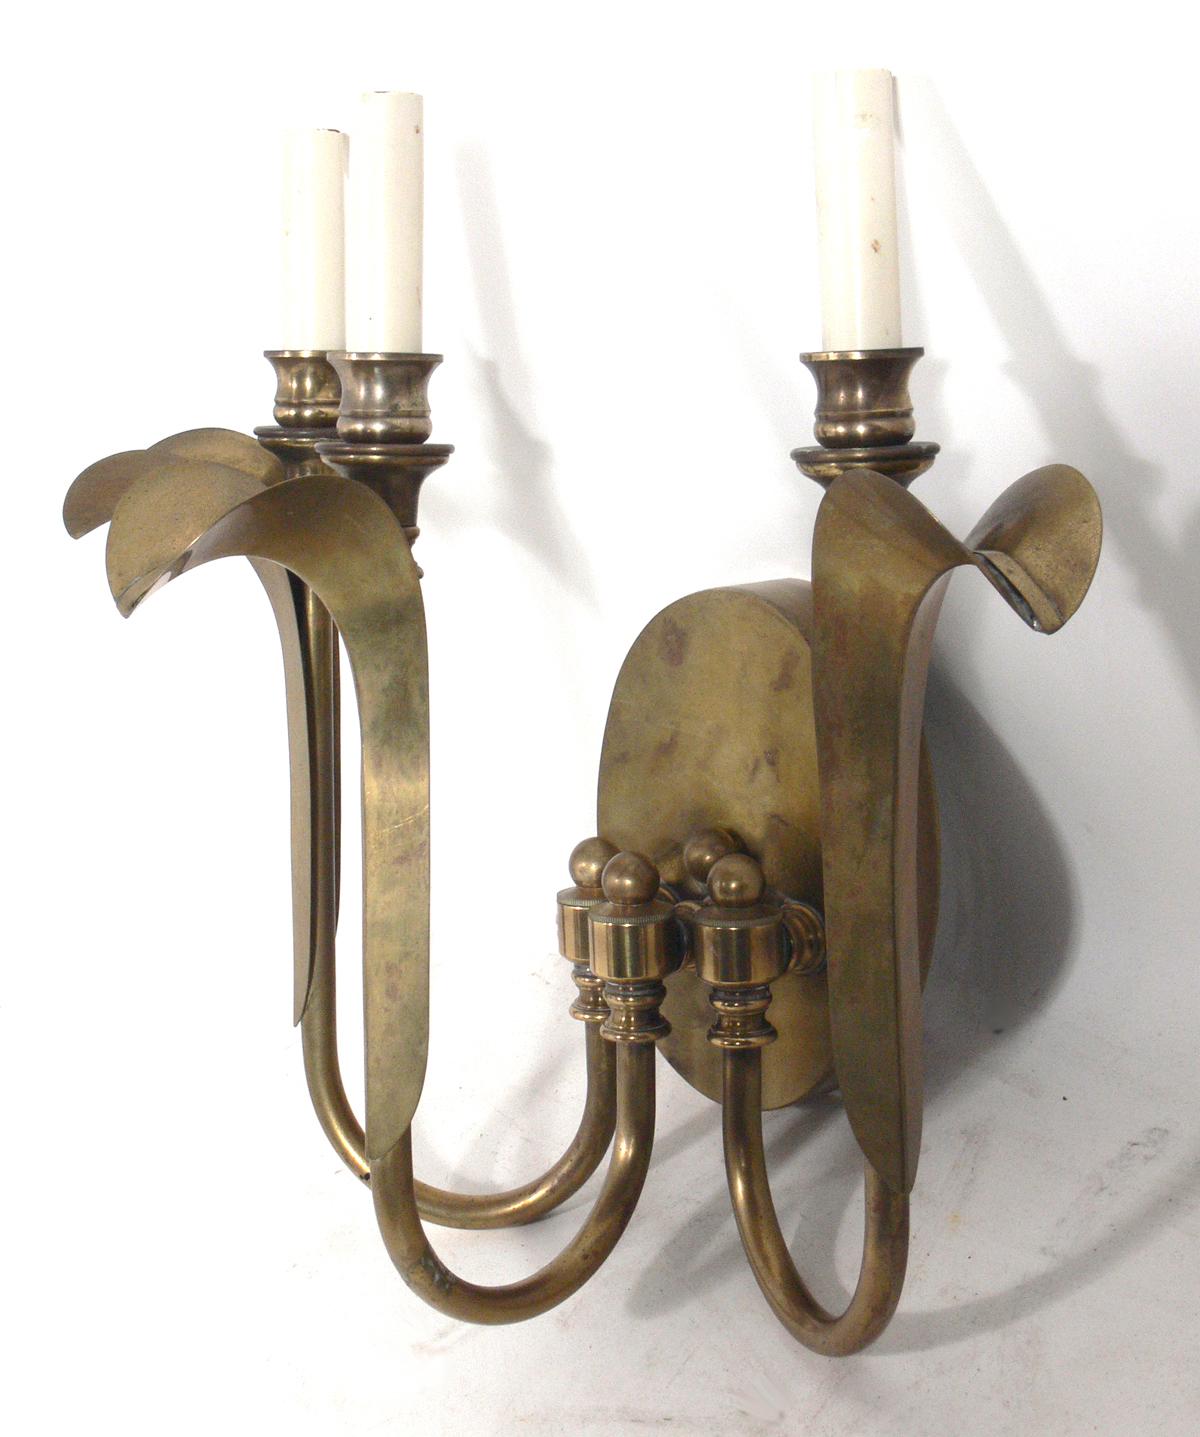 Pair of elegant brass sconces, in the manner of Tommi Parzinger, American, circa 1960s. They retain their warm original patina. They have been rewired and are ready to use.